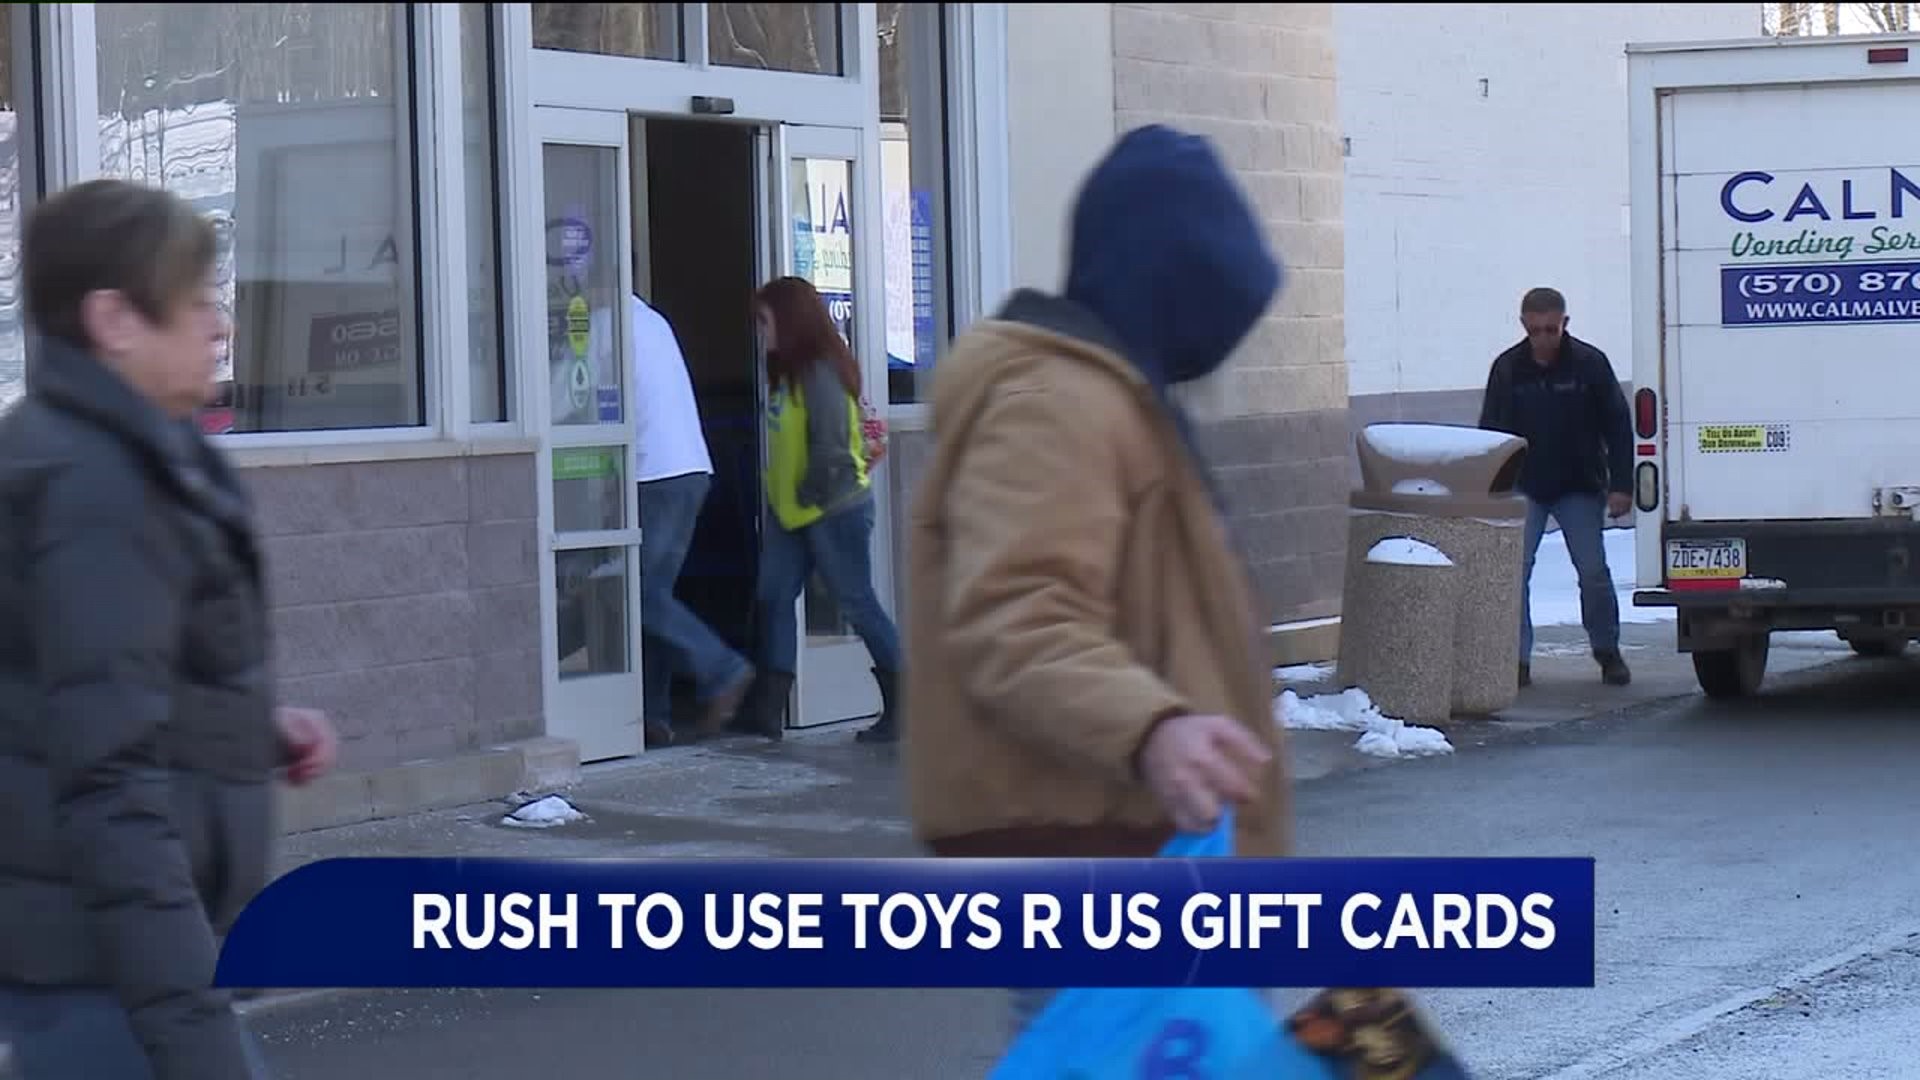 Rush to Use Toys "R" Us Gift Cards